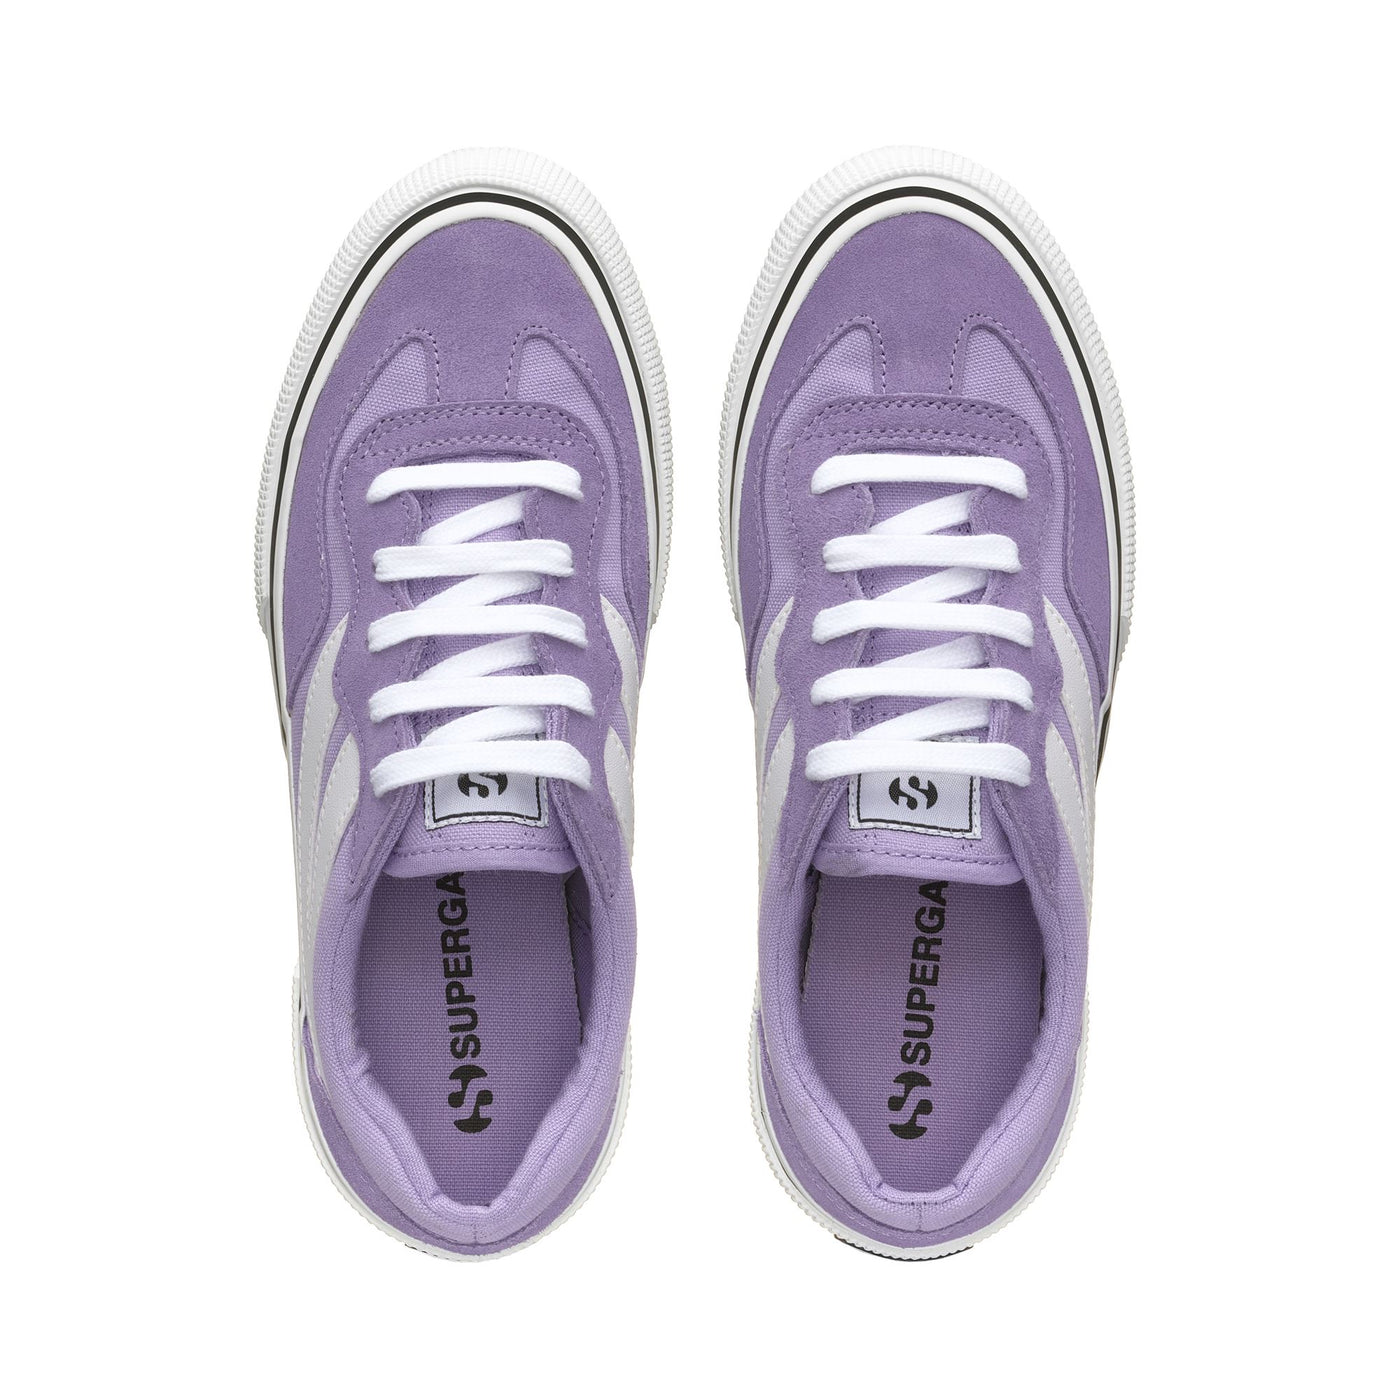 Sneakers Unisex 2941 REVOLLEY COLORBLOCK Low Cut VIOLET LILLA-WHITE Dressed Back (jpg Rgb)		